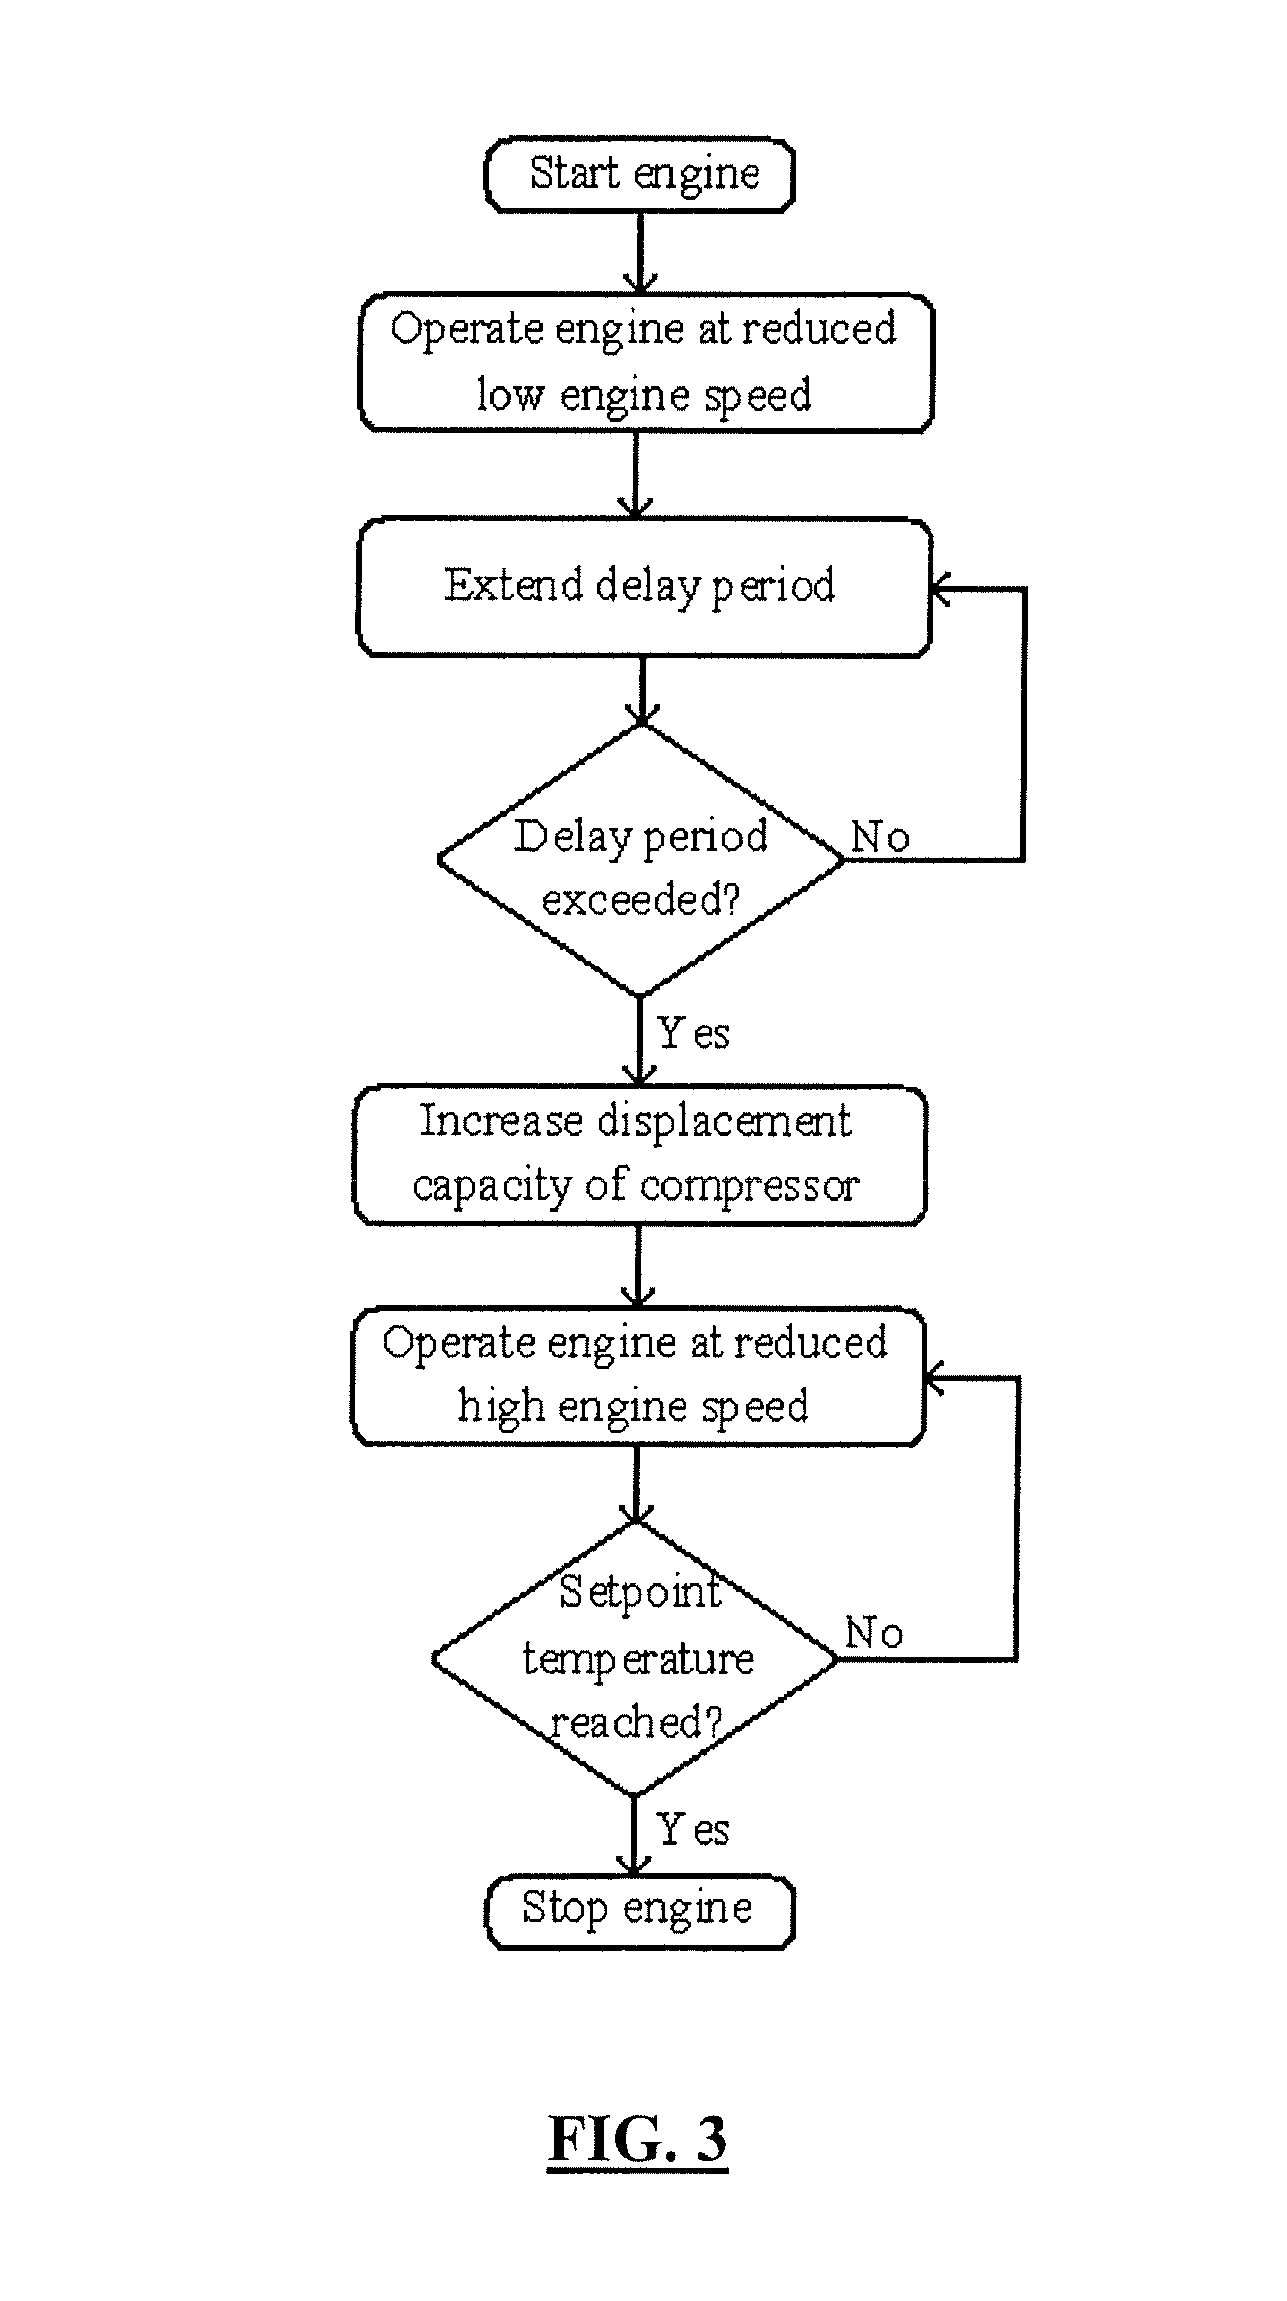 Efficient Control Algorithm for Start-Stop Operation of a Refrigeration Unit Powered by Engine